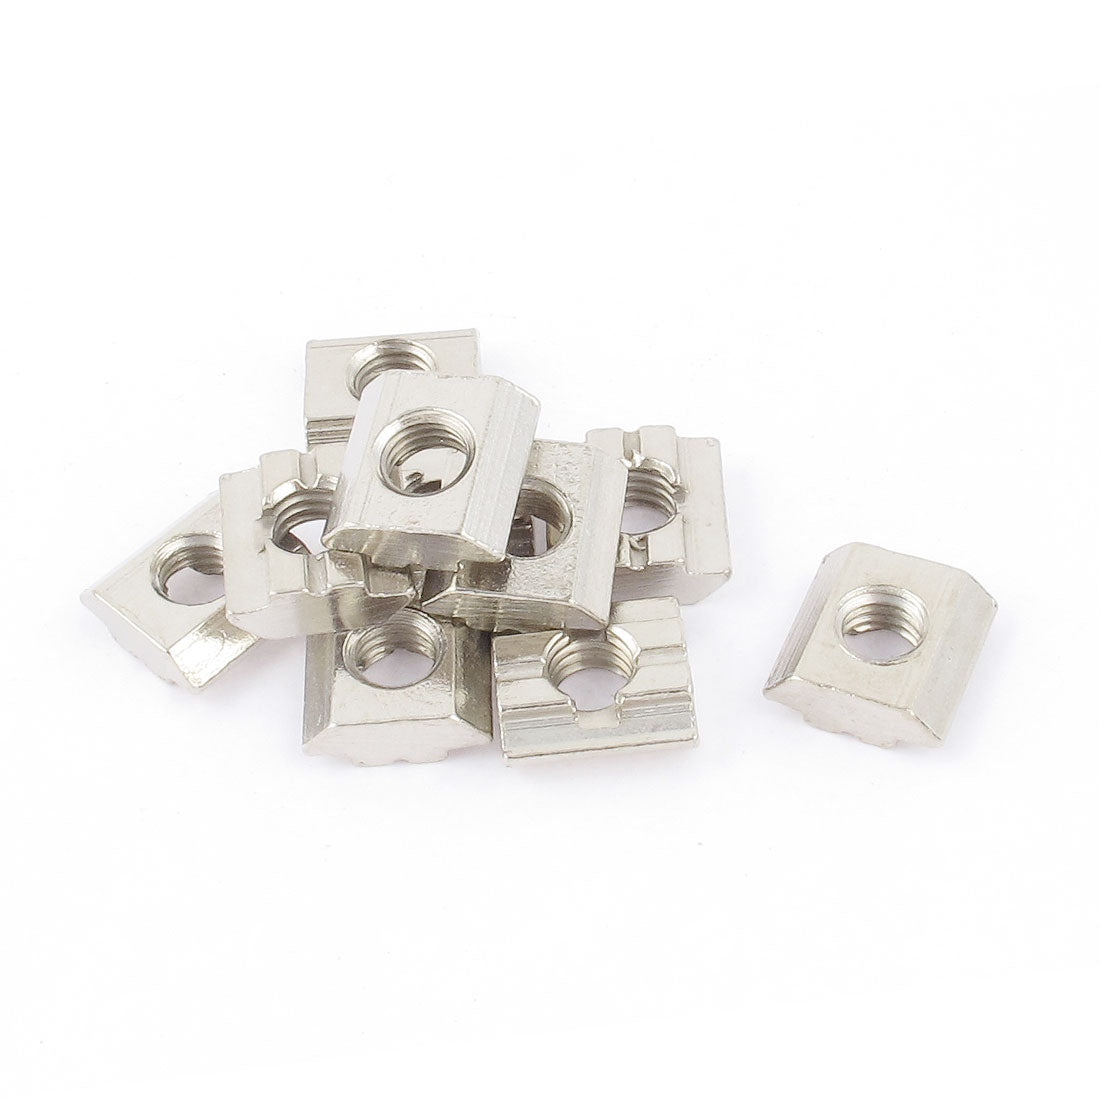 uxcell Uxcell 10Pcs T-Slot Aluminum Extrusion 30 Series M8 Hardware Slide In T-Nut